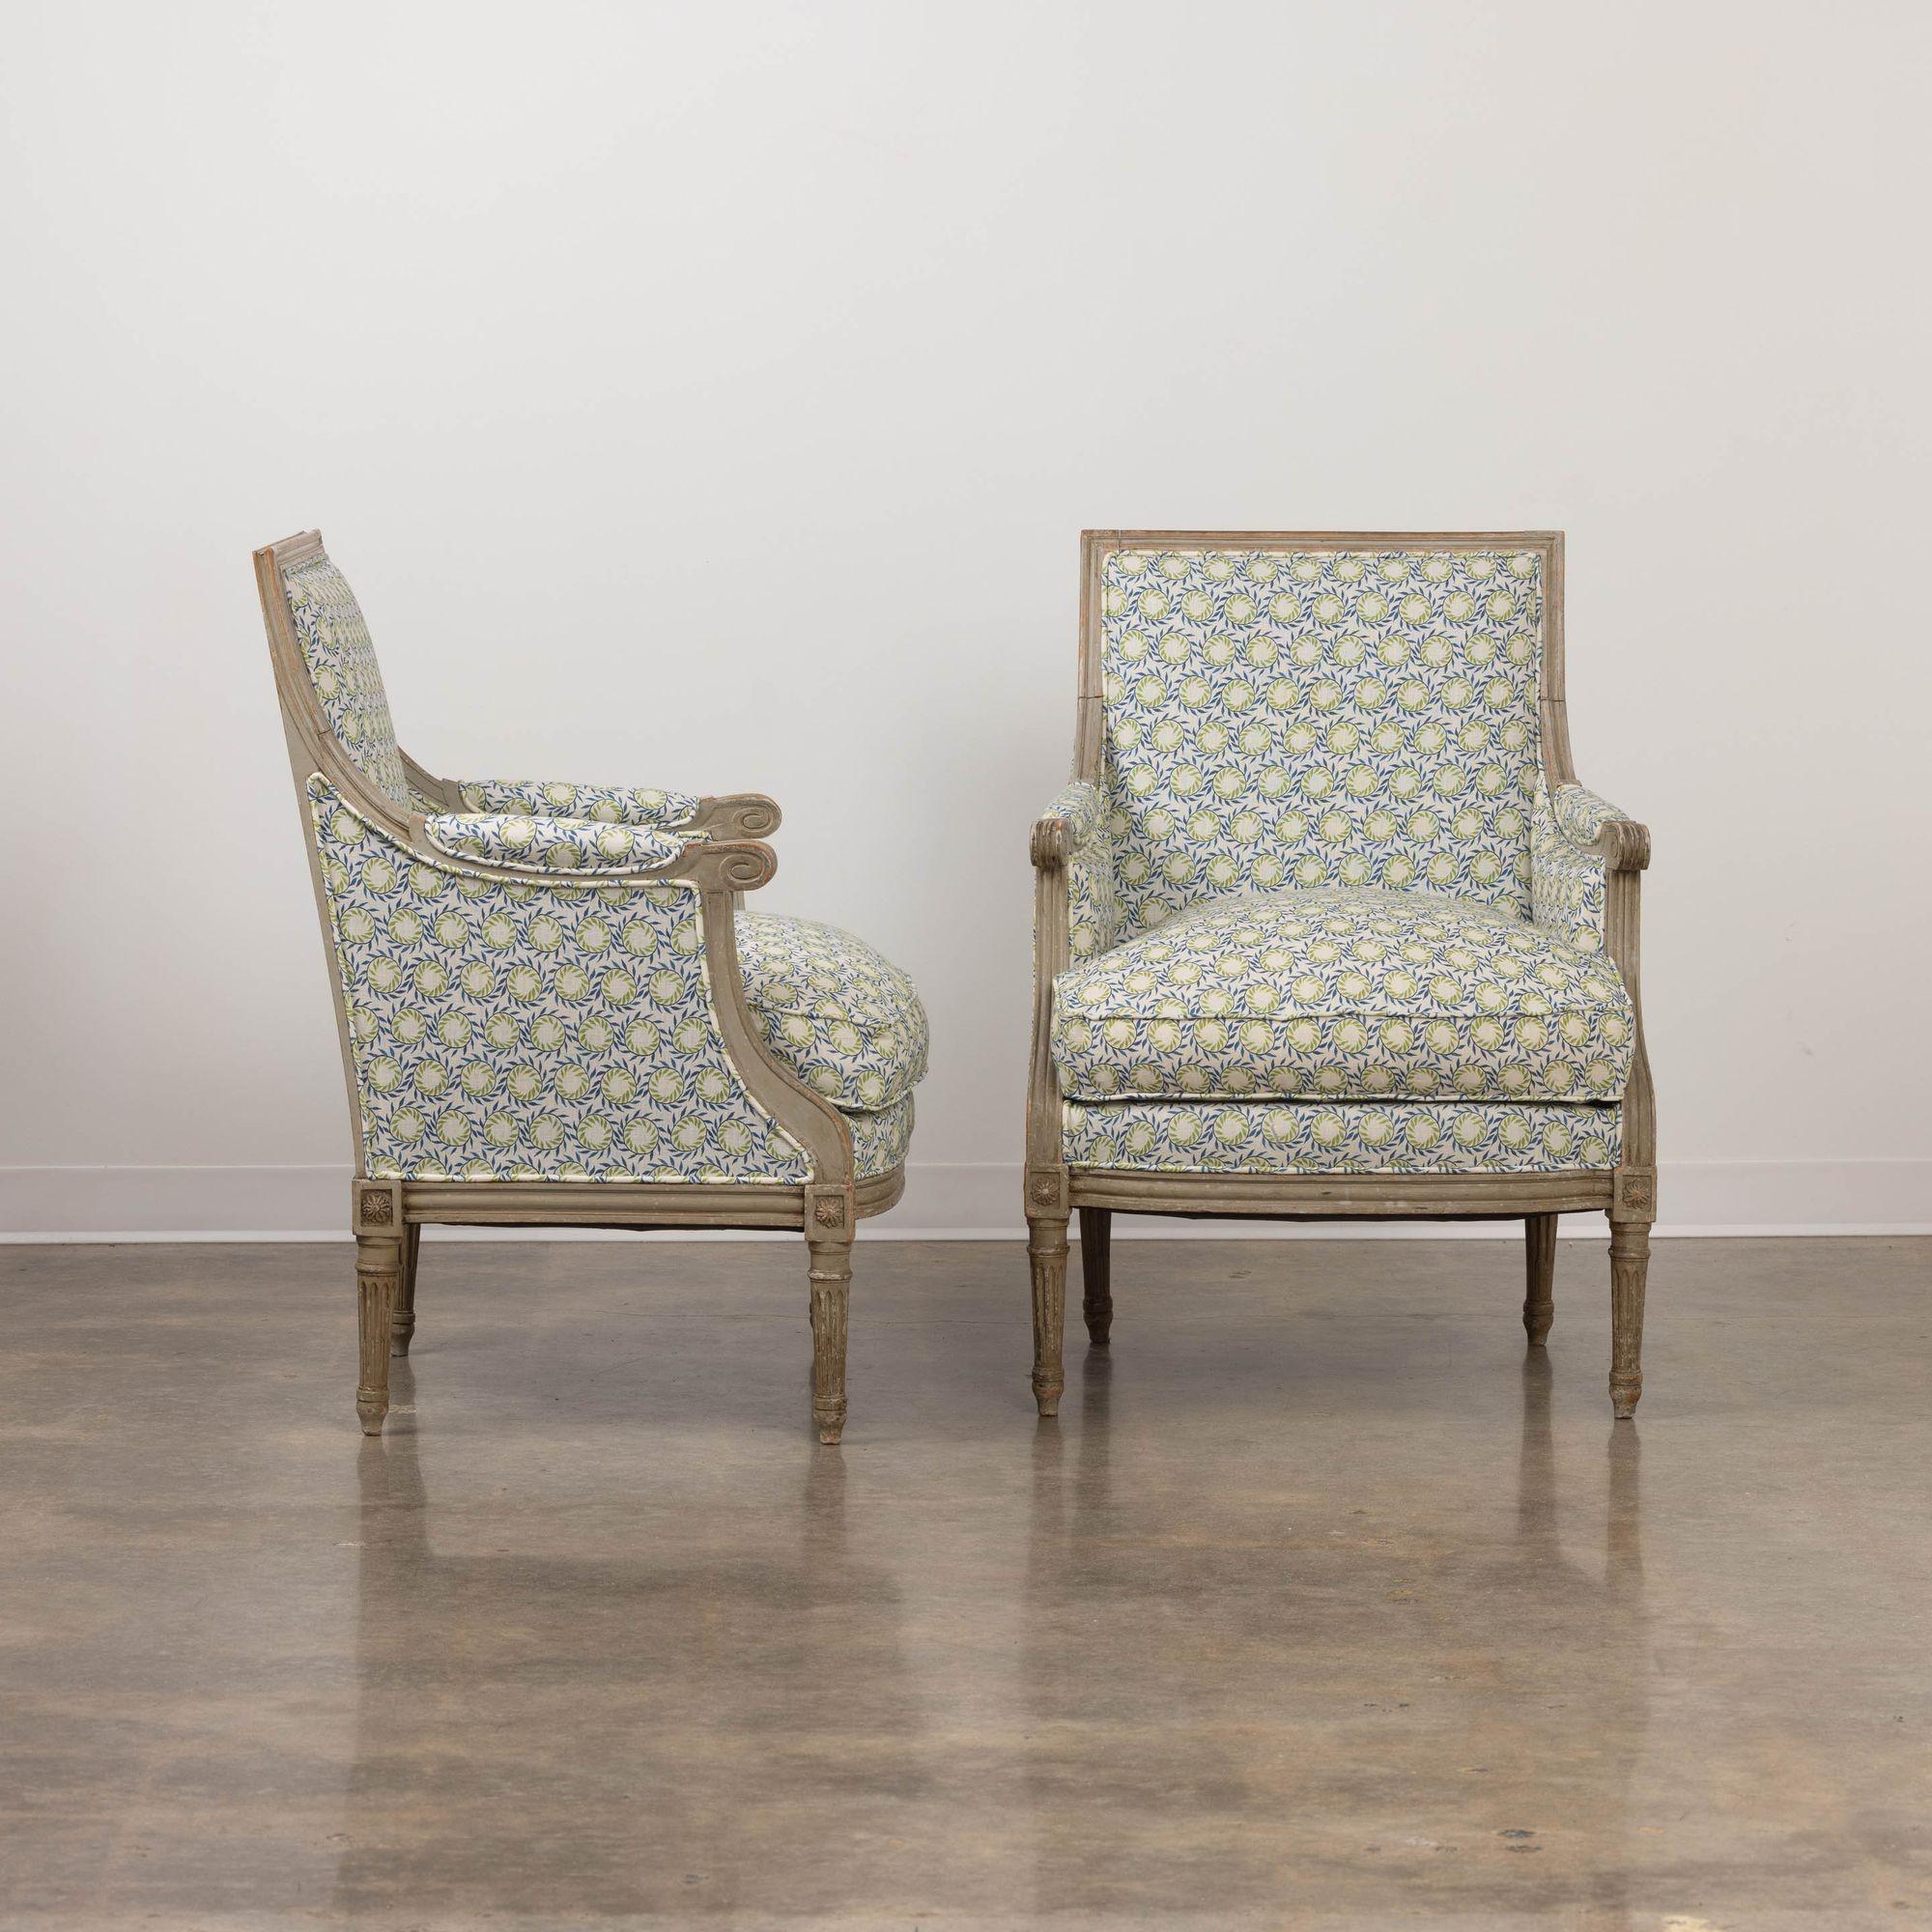 19th c. French Pair of Louis XVI Bergère Chairs in Original Paint In Excellent Condition For Sale In Wichita, KS